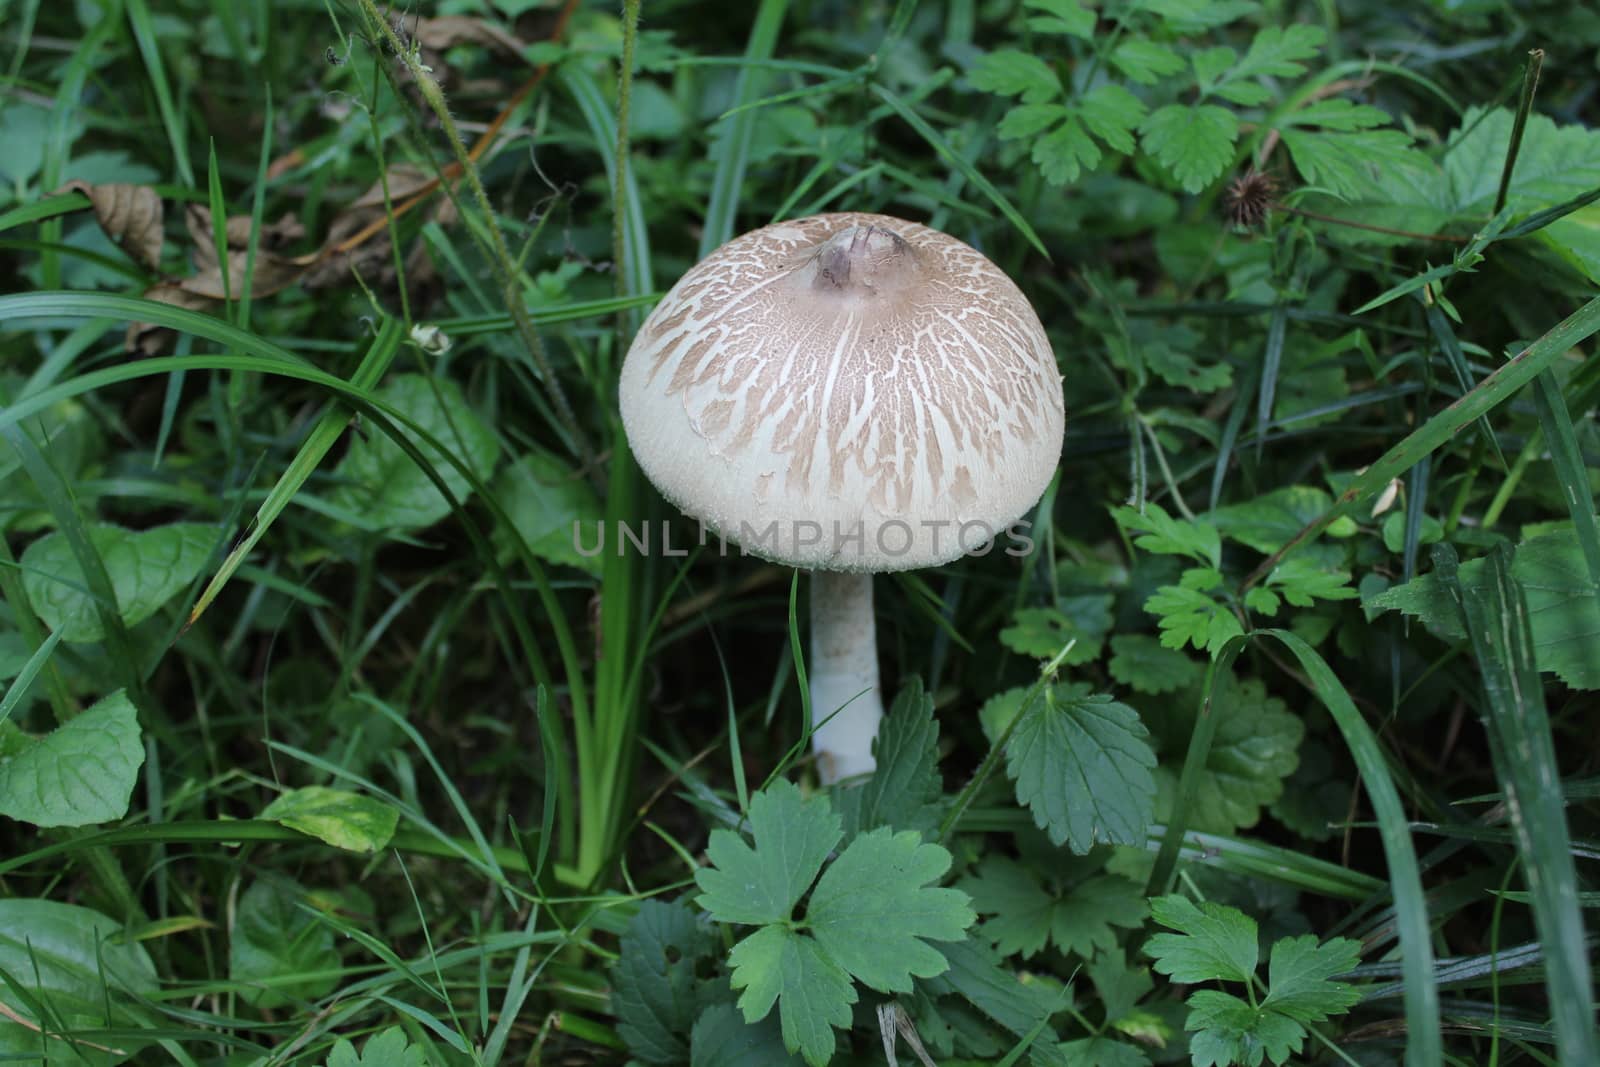 The picture shows a mushroom in the grass in the forest.